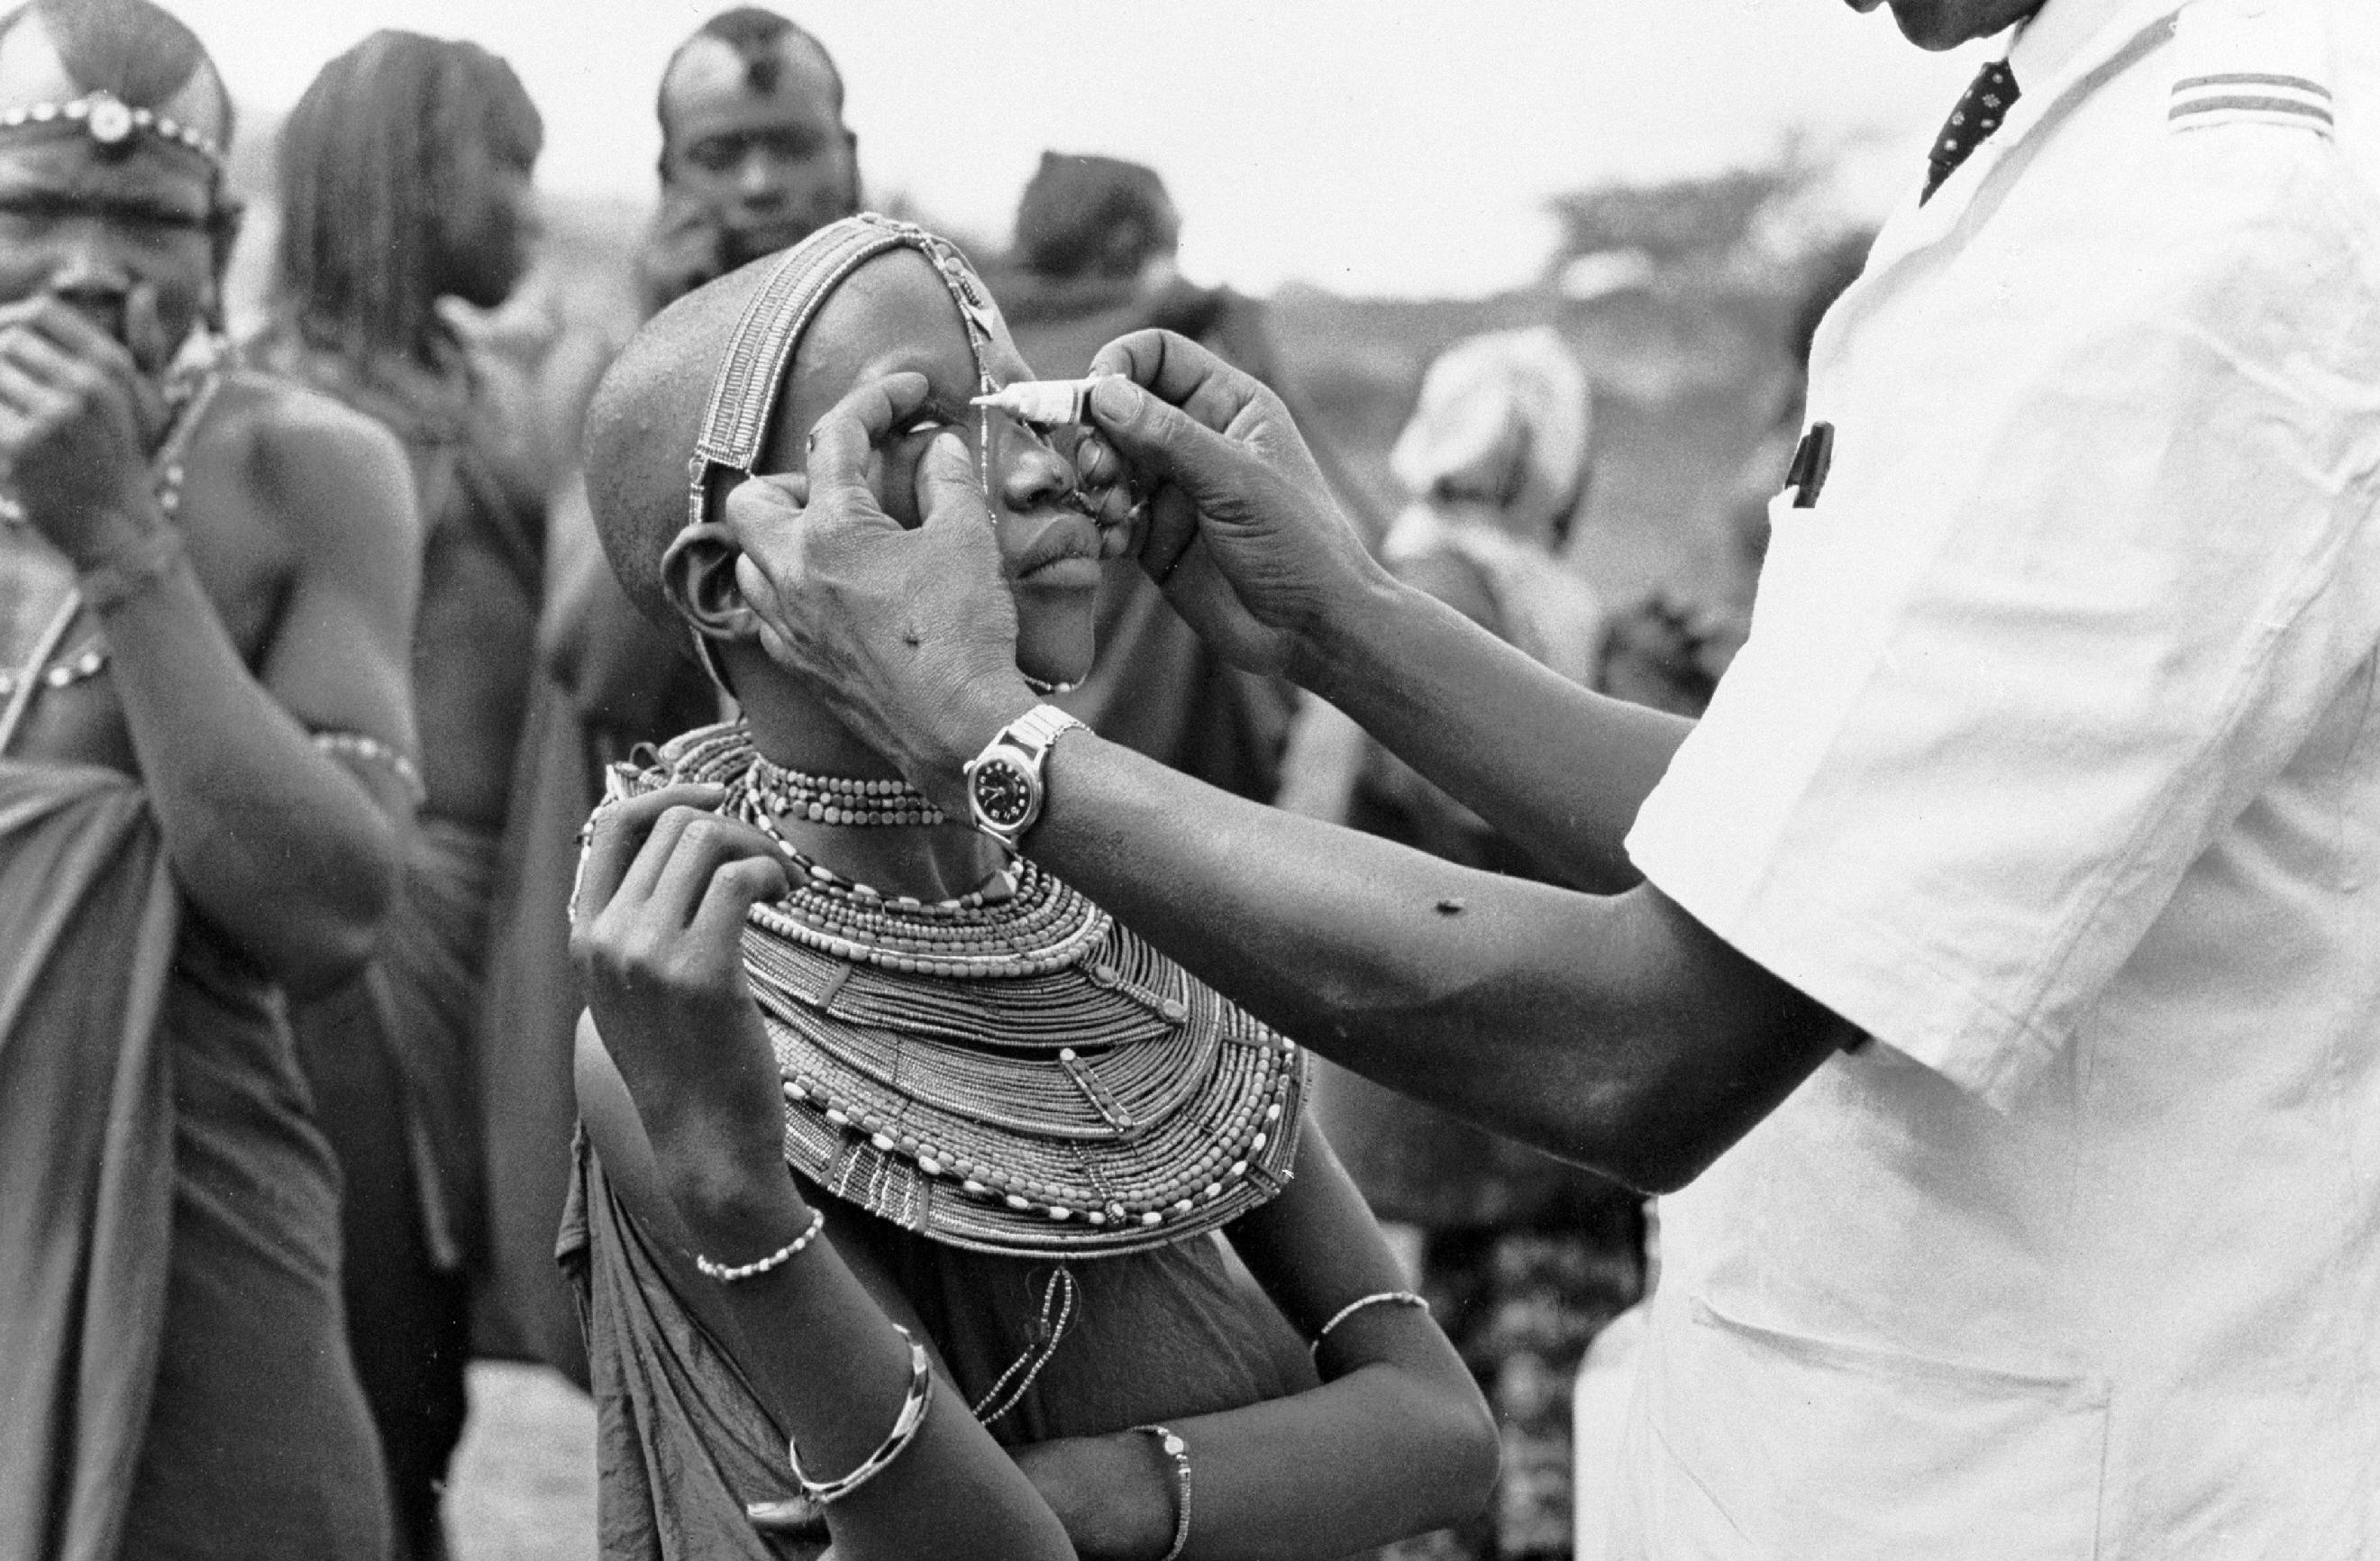 A man health worker from a UNICEF-assisted mobile health unit applies antibiotic ointment to the eye of an indigenous girl from the nomadic Masai ethnic group during a demonstration in a Masai community camped at Olobelibel. 